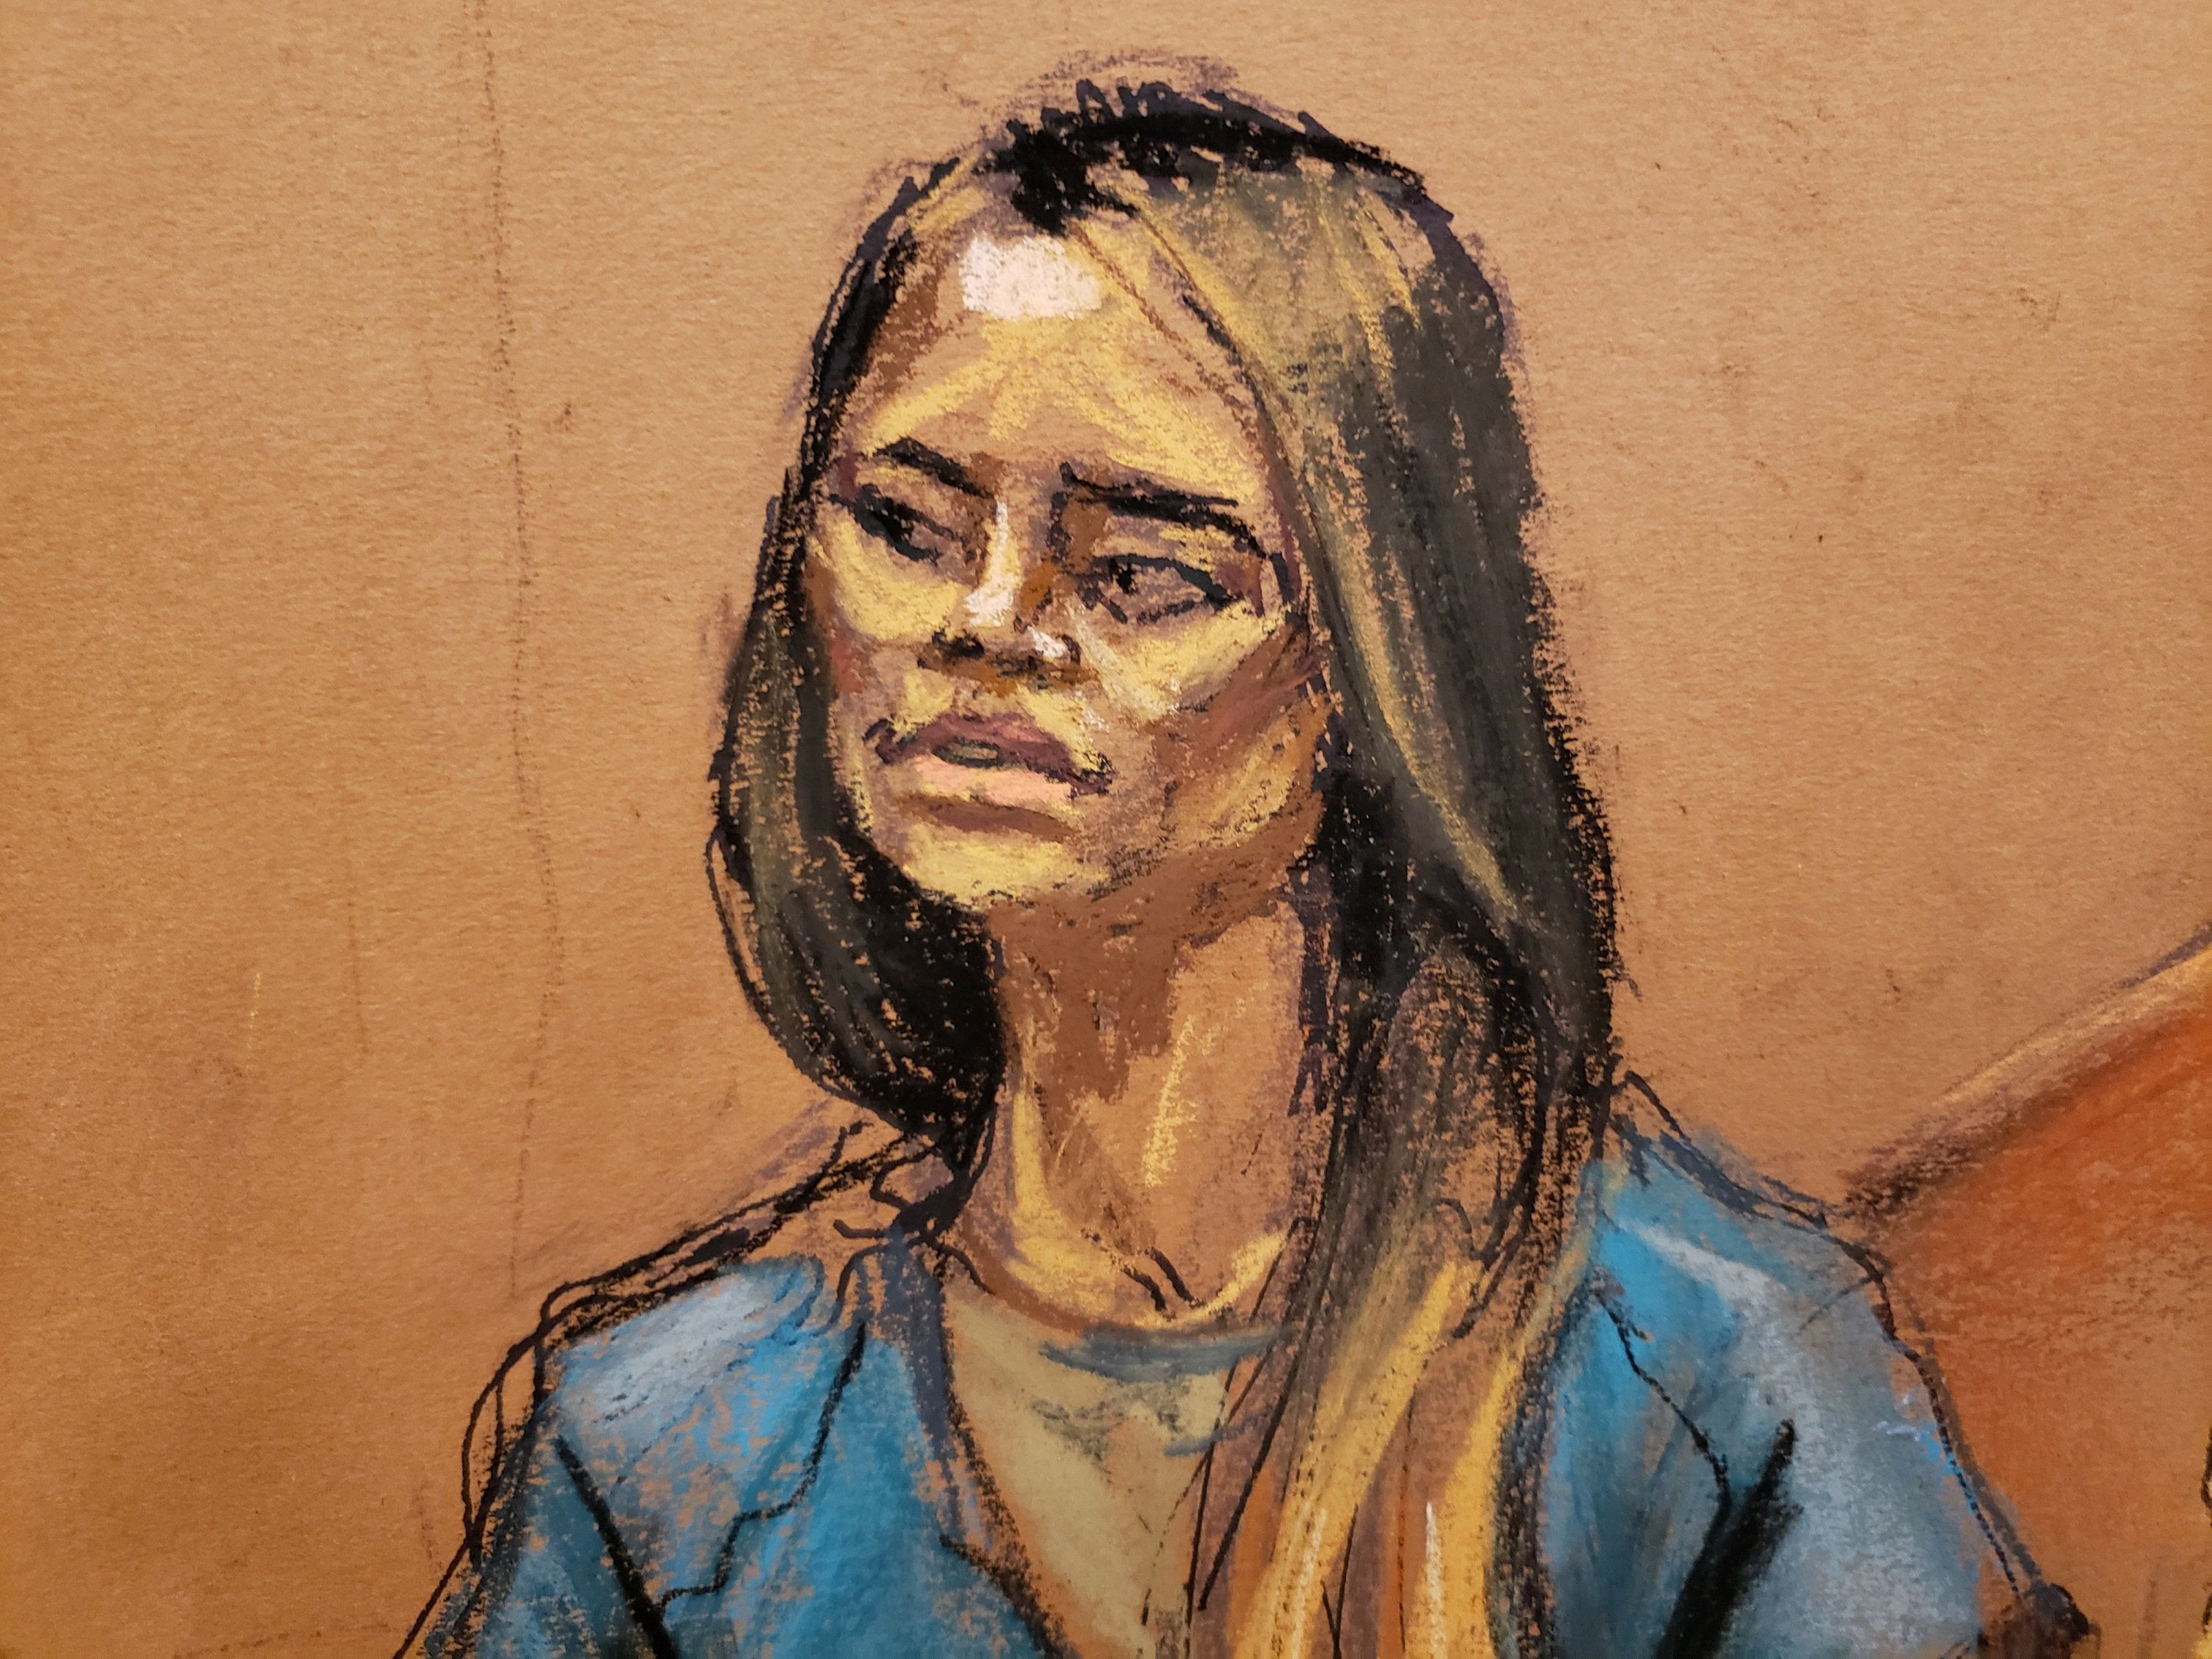 Lucero Guadalupe Sanchez Lopez, a girlfriend of accused Mexican drug lord Joaquin "El Chapo" Guzman (not shown), testifies in this courtroom sketch in Brooklyn federal court, in New York City, U.S. January 17, 2019. REUTERS/Jane Rosenberg NO RESALES. NO ARCHIVES